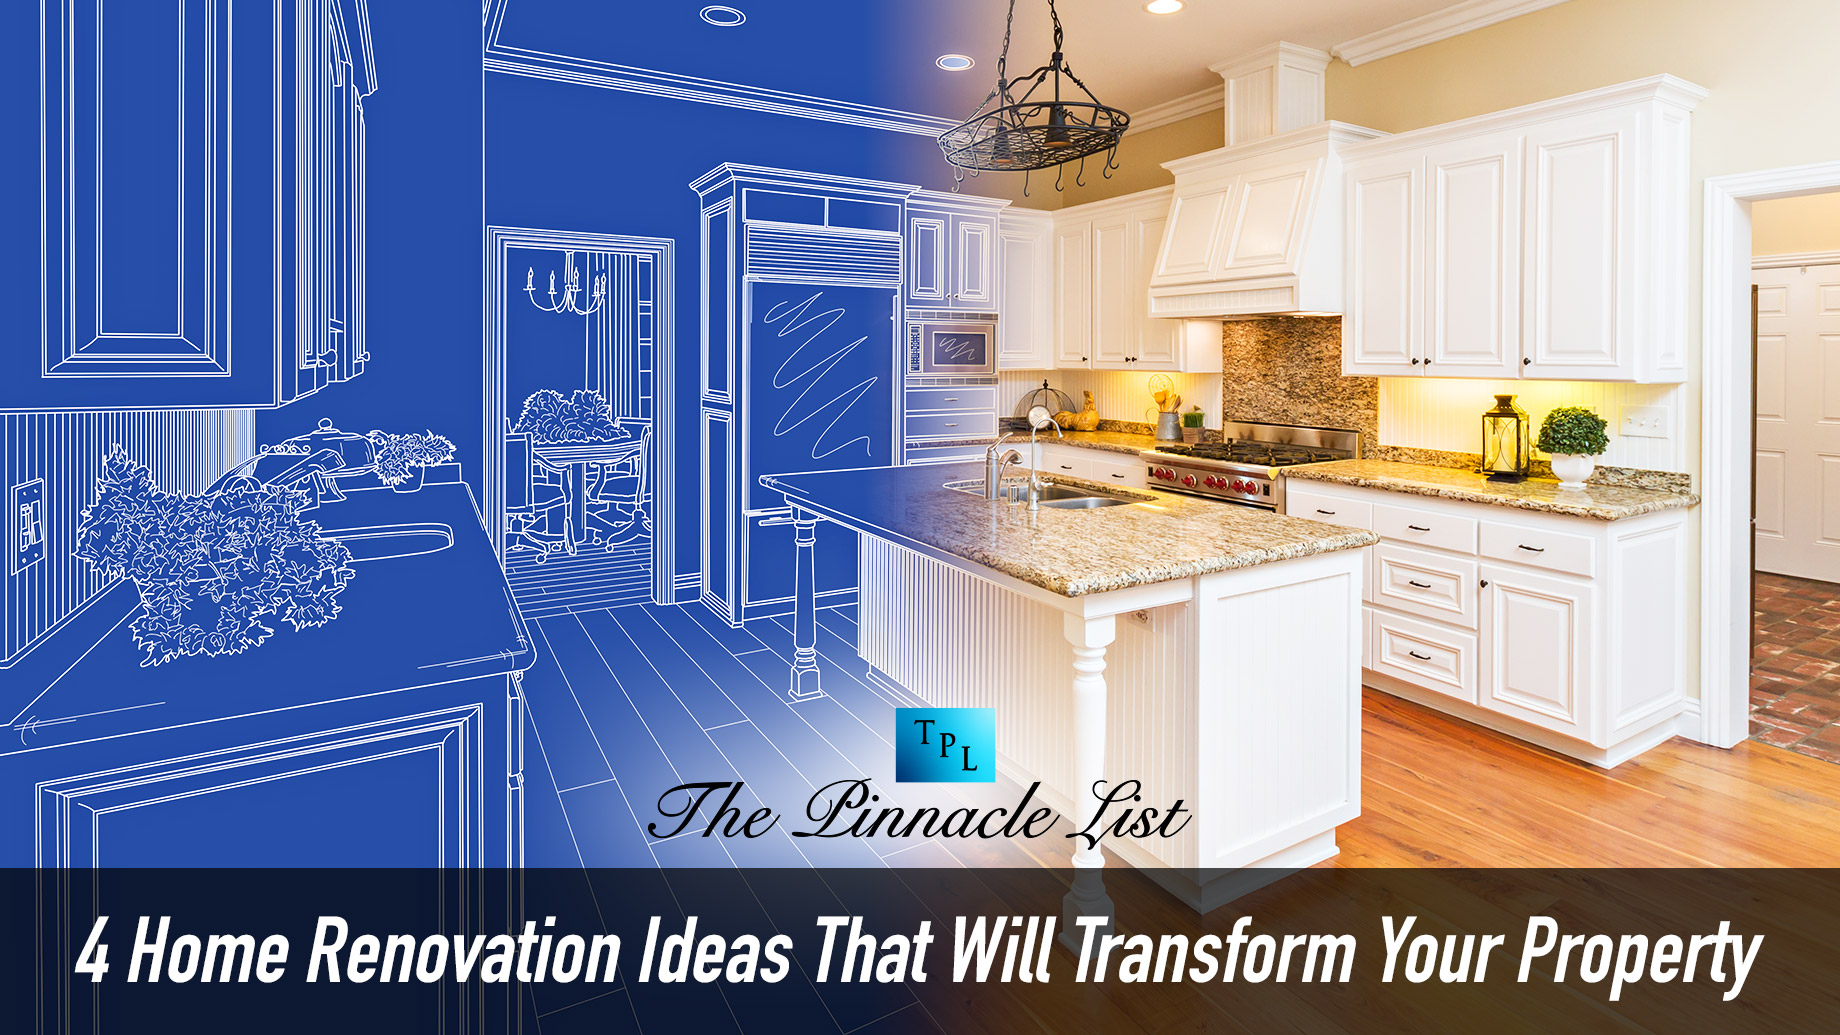 4 Home Renovation Ideas That Will Transform Your Property